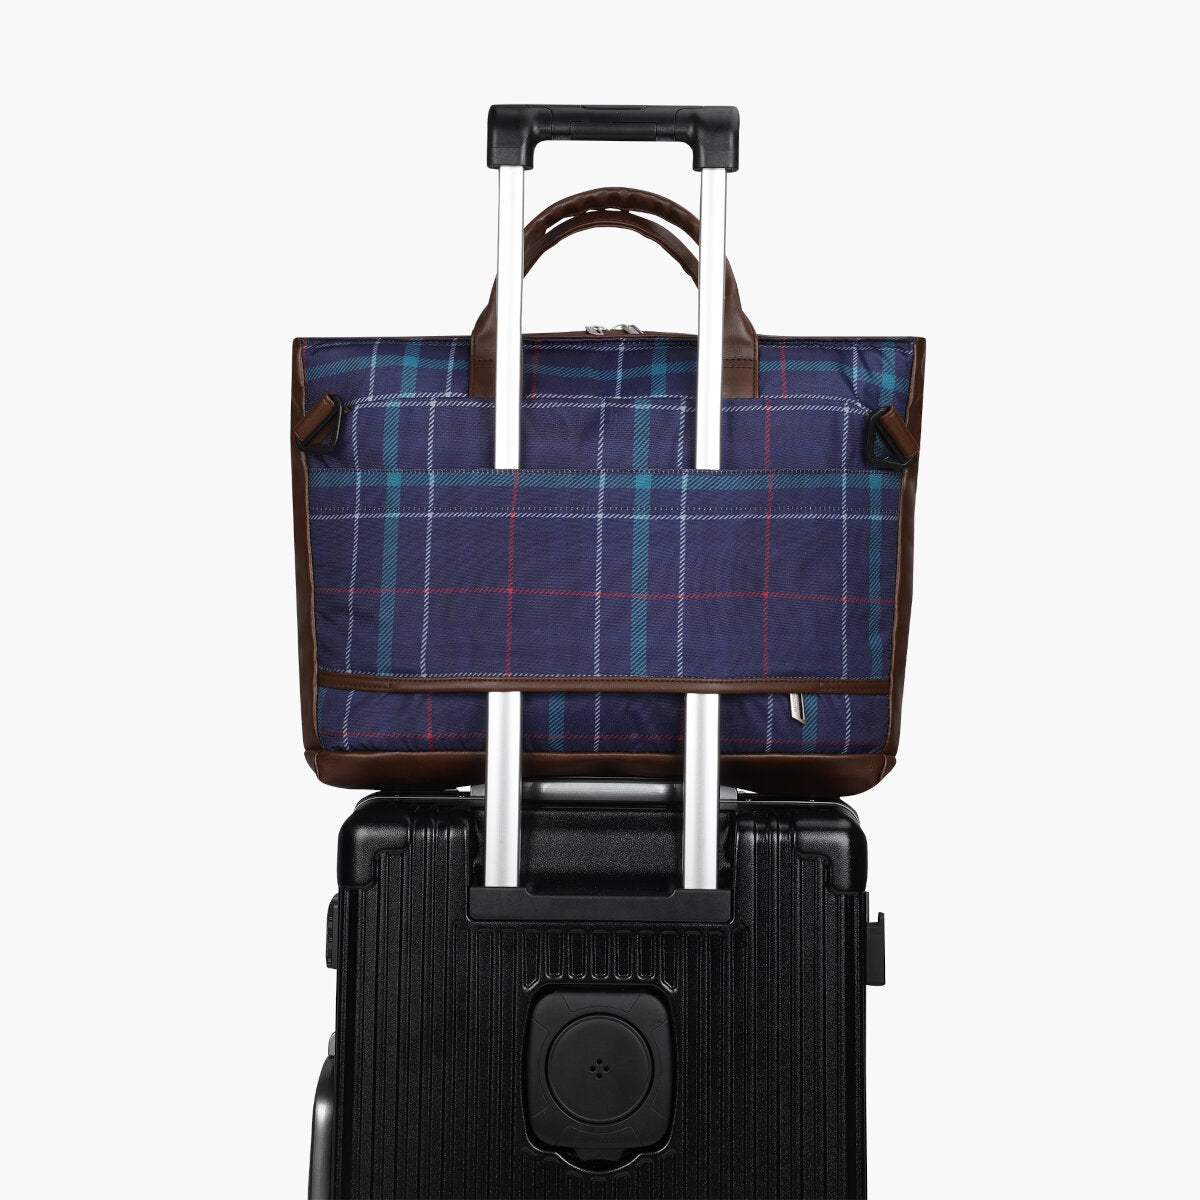 Plaid Print | Protecta Evenly Poised Office Laptop Bag for Women - 8